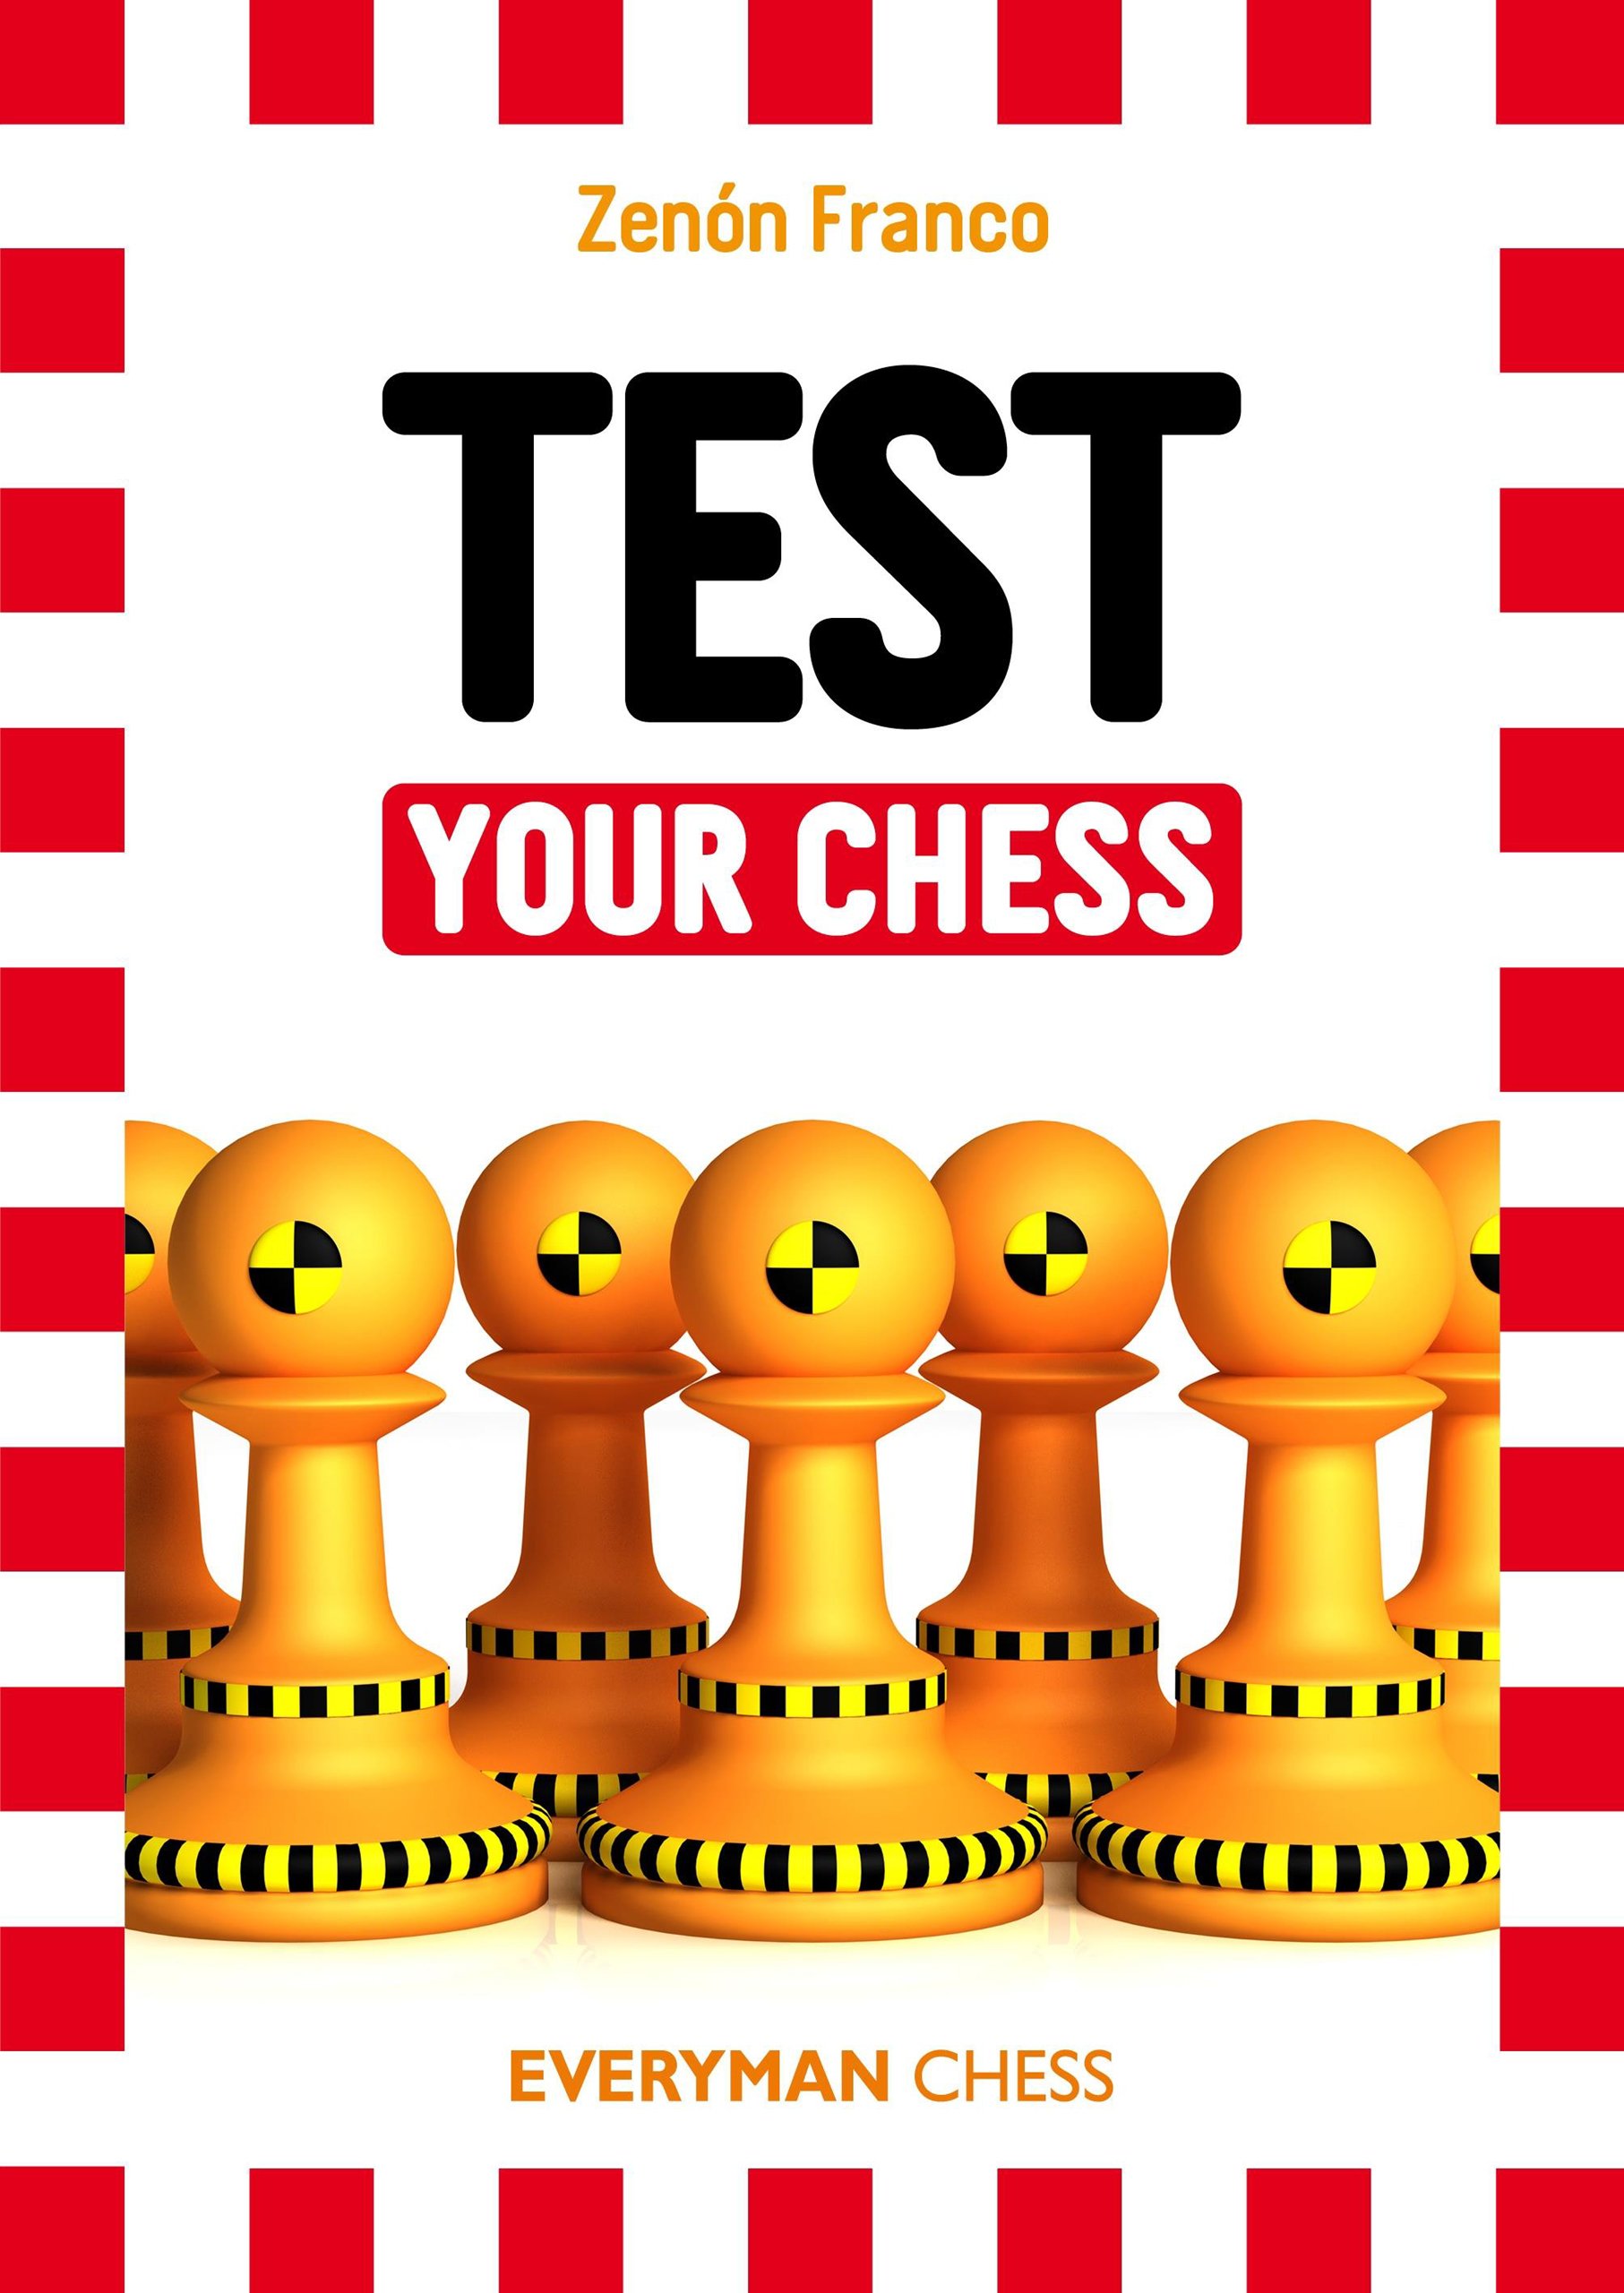 Franco: Test your Chess